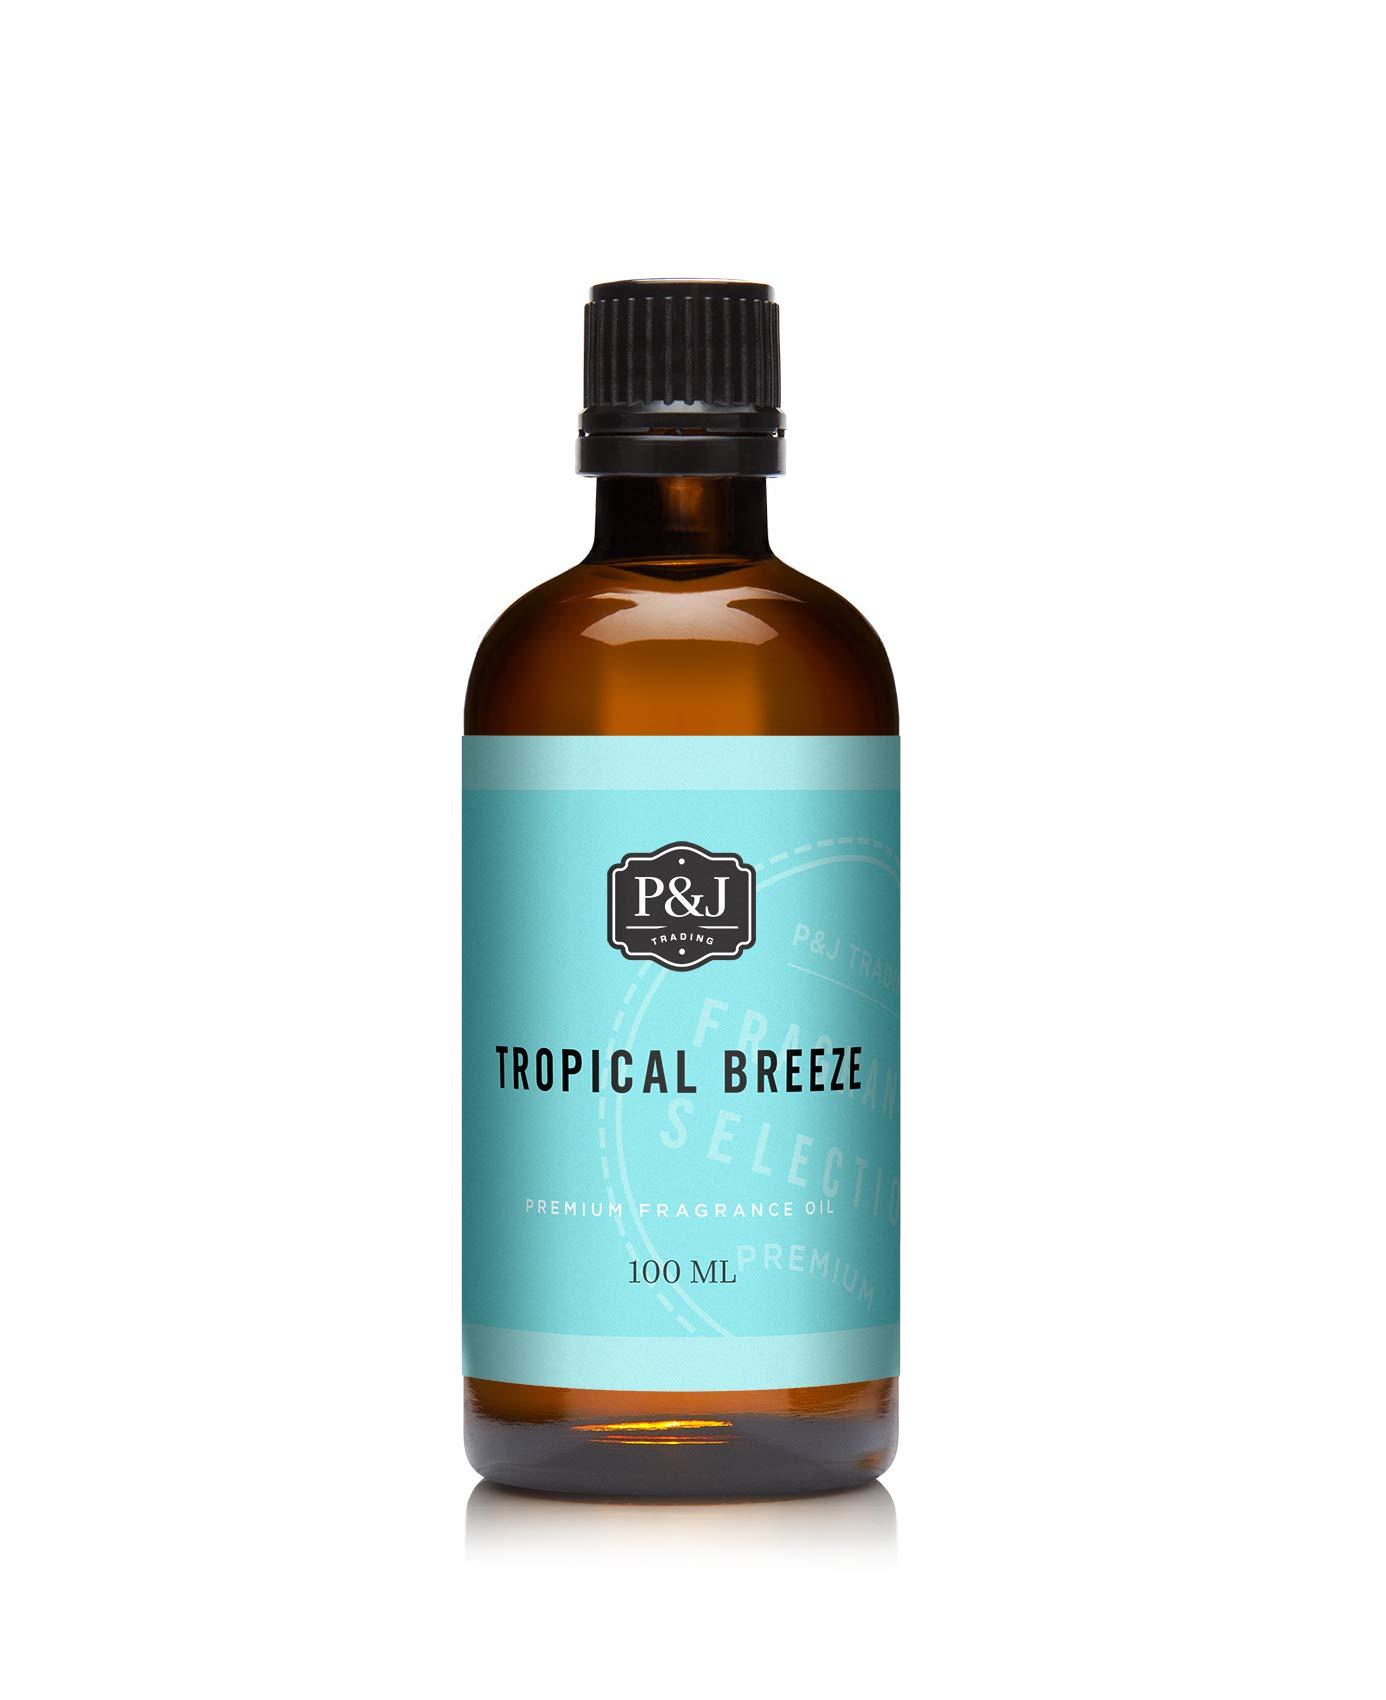 P&j Fragrance Oil Tropical Set | Banana, Coconut, Awapuhi and Seaberry, Pineapple, Mango, Ocean Breeze Candle Scents for Making, Freshie Scents, Soap